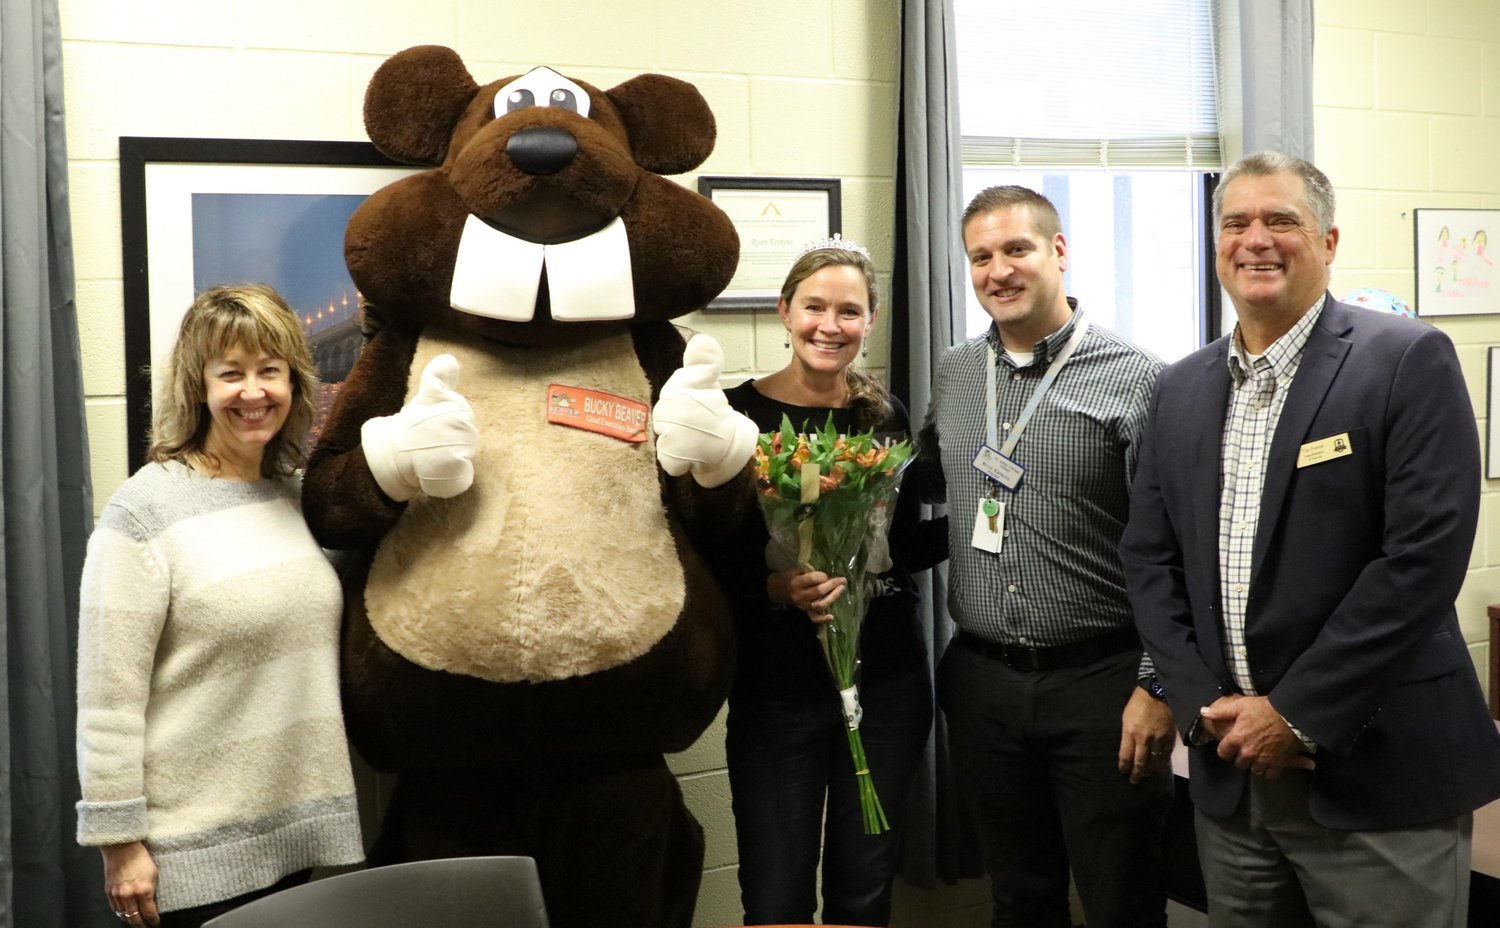 Donna Lueders, INK! executive director; Bucky the Beaver; Patricia McElhone, St. Johns Virtual School (with flowers); Ryan Erskine, school principal; and St. Johns County School District Superintendent Tim Forson.